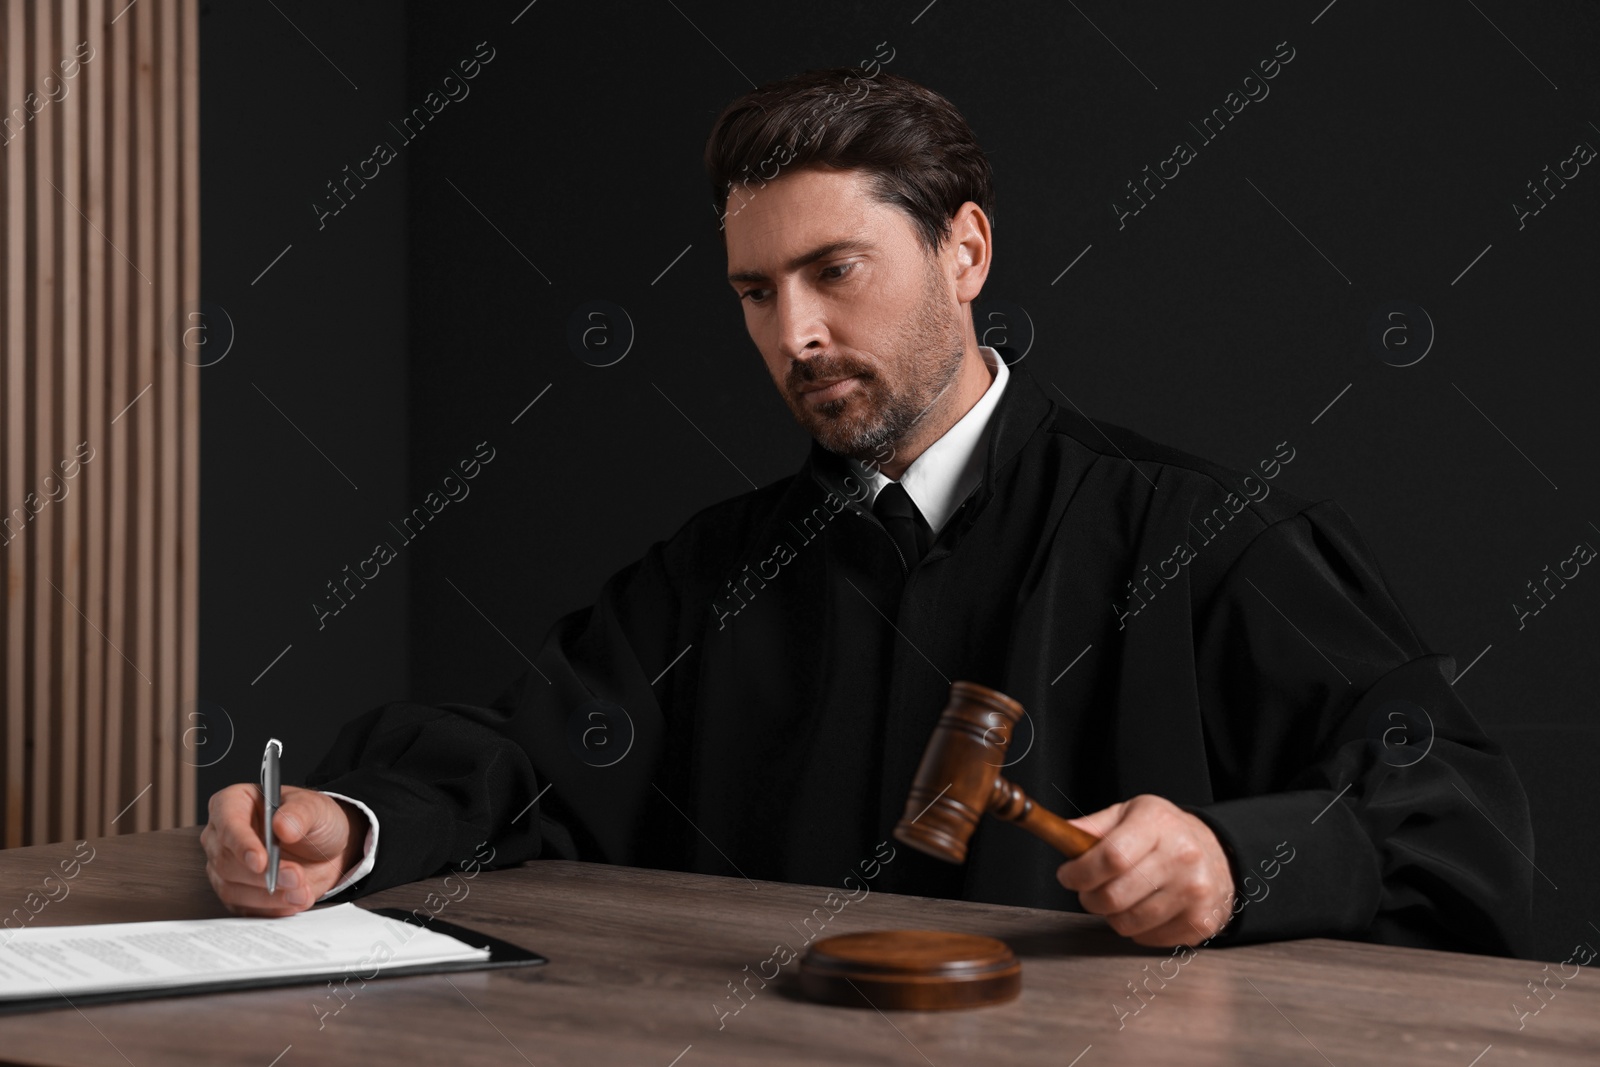 Photo of Judge with gavel and papers sitting at wooden table against black background